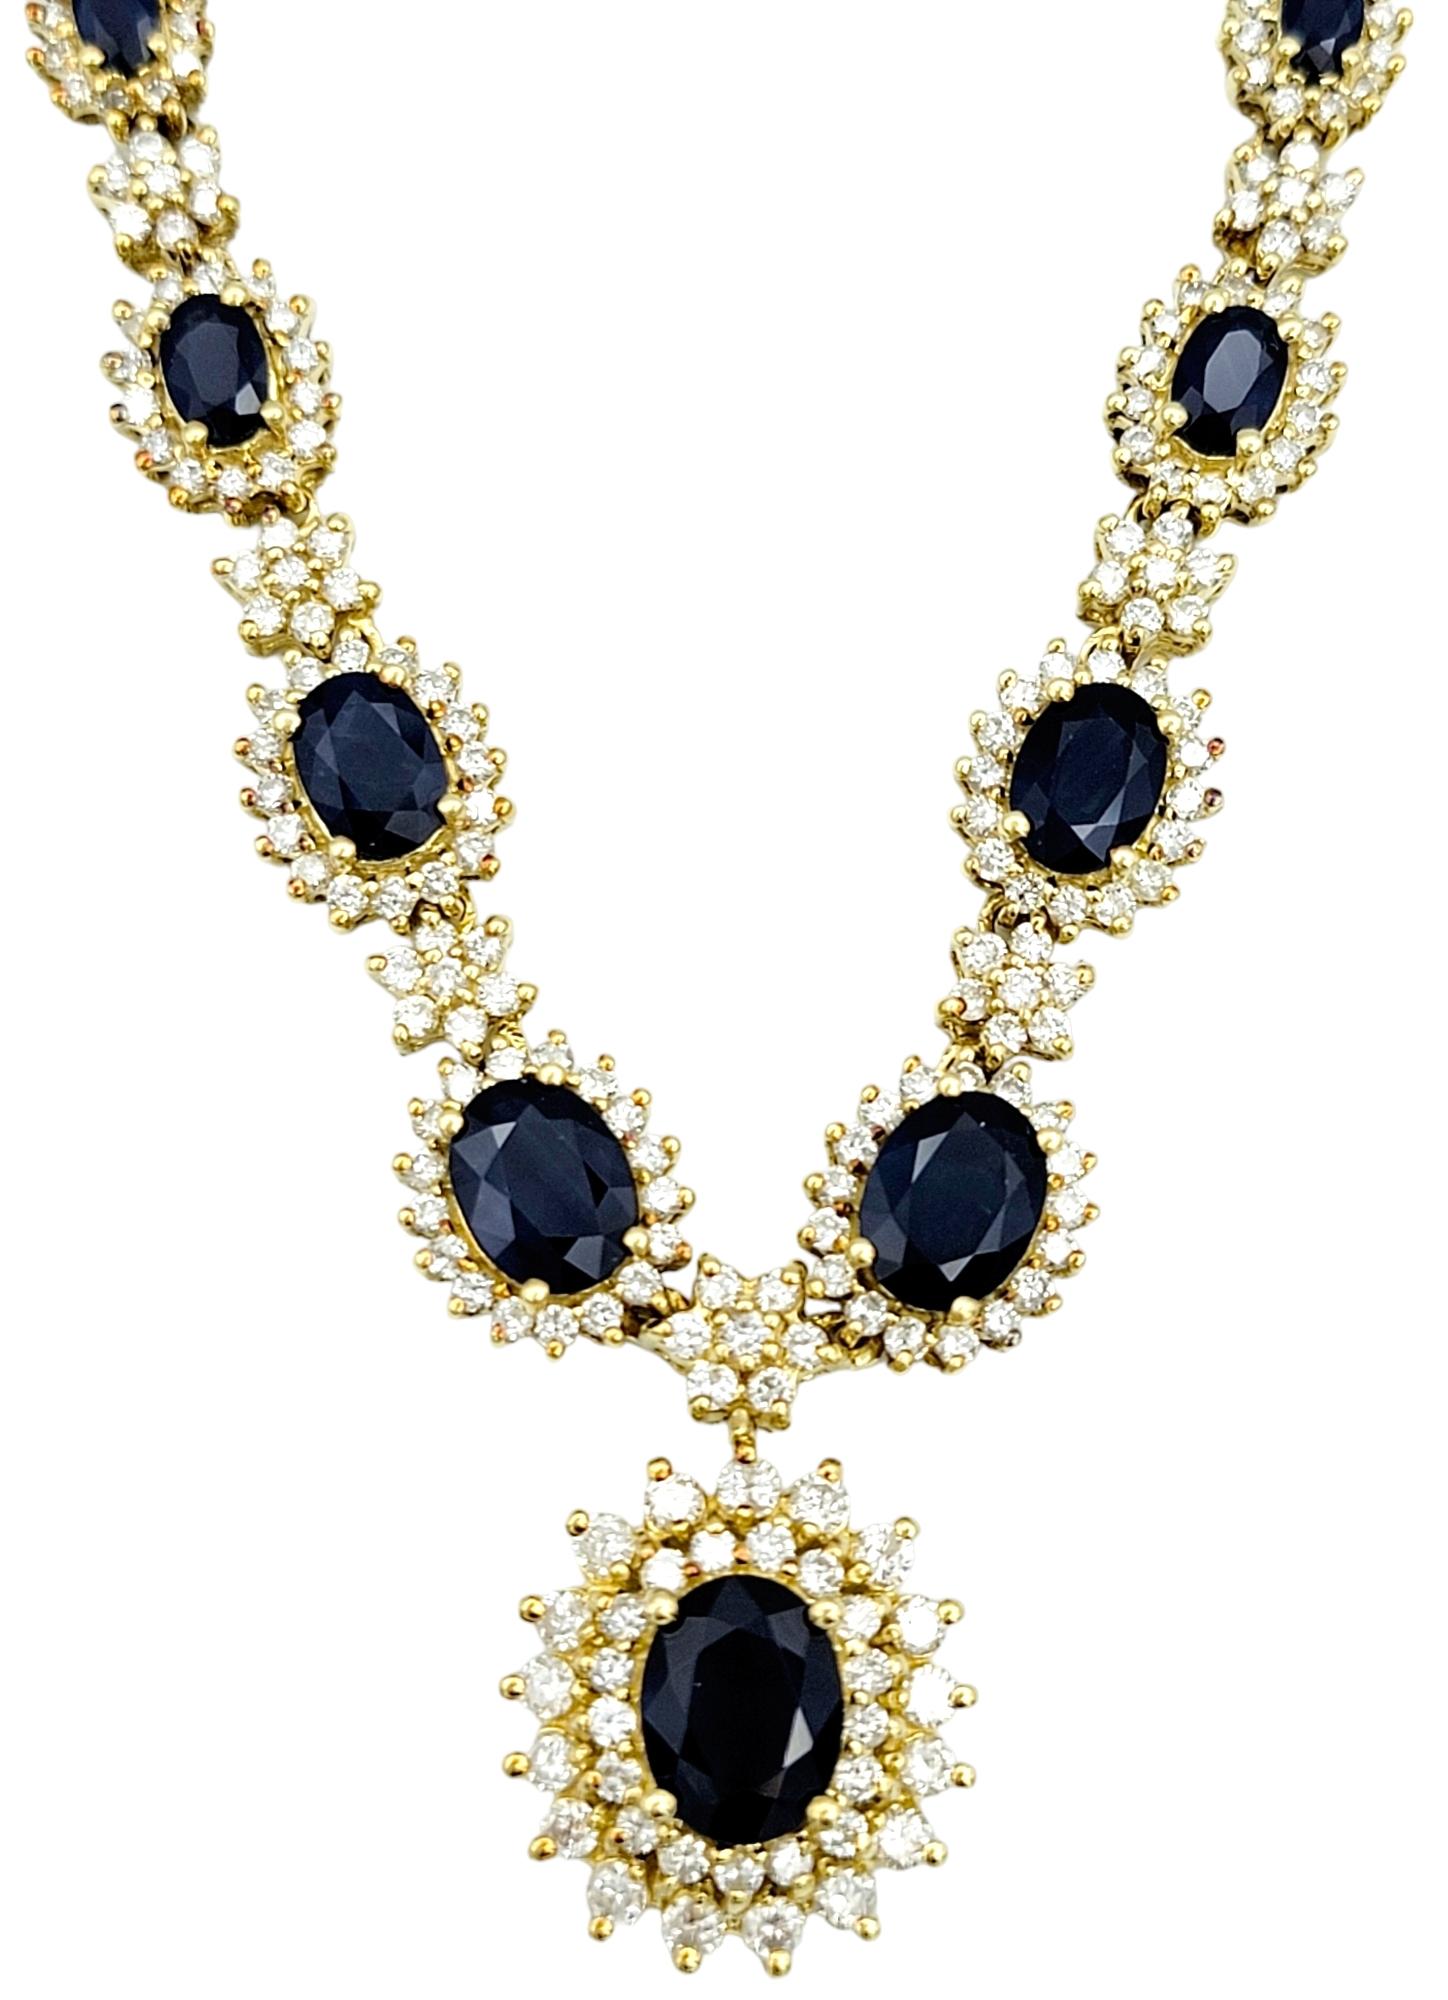 This exquisite diamond and sapphire pendant necklace set in 18 karat yellow gold is a true work of art that exudes timeless elegance and luxury. The pendant, with its stationary design, serves as the focal point of this jewelry piece. At its heart